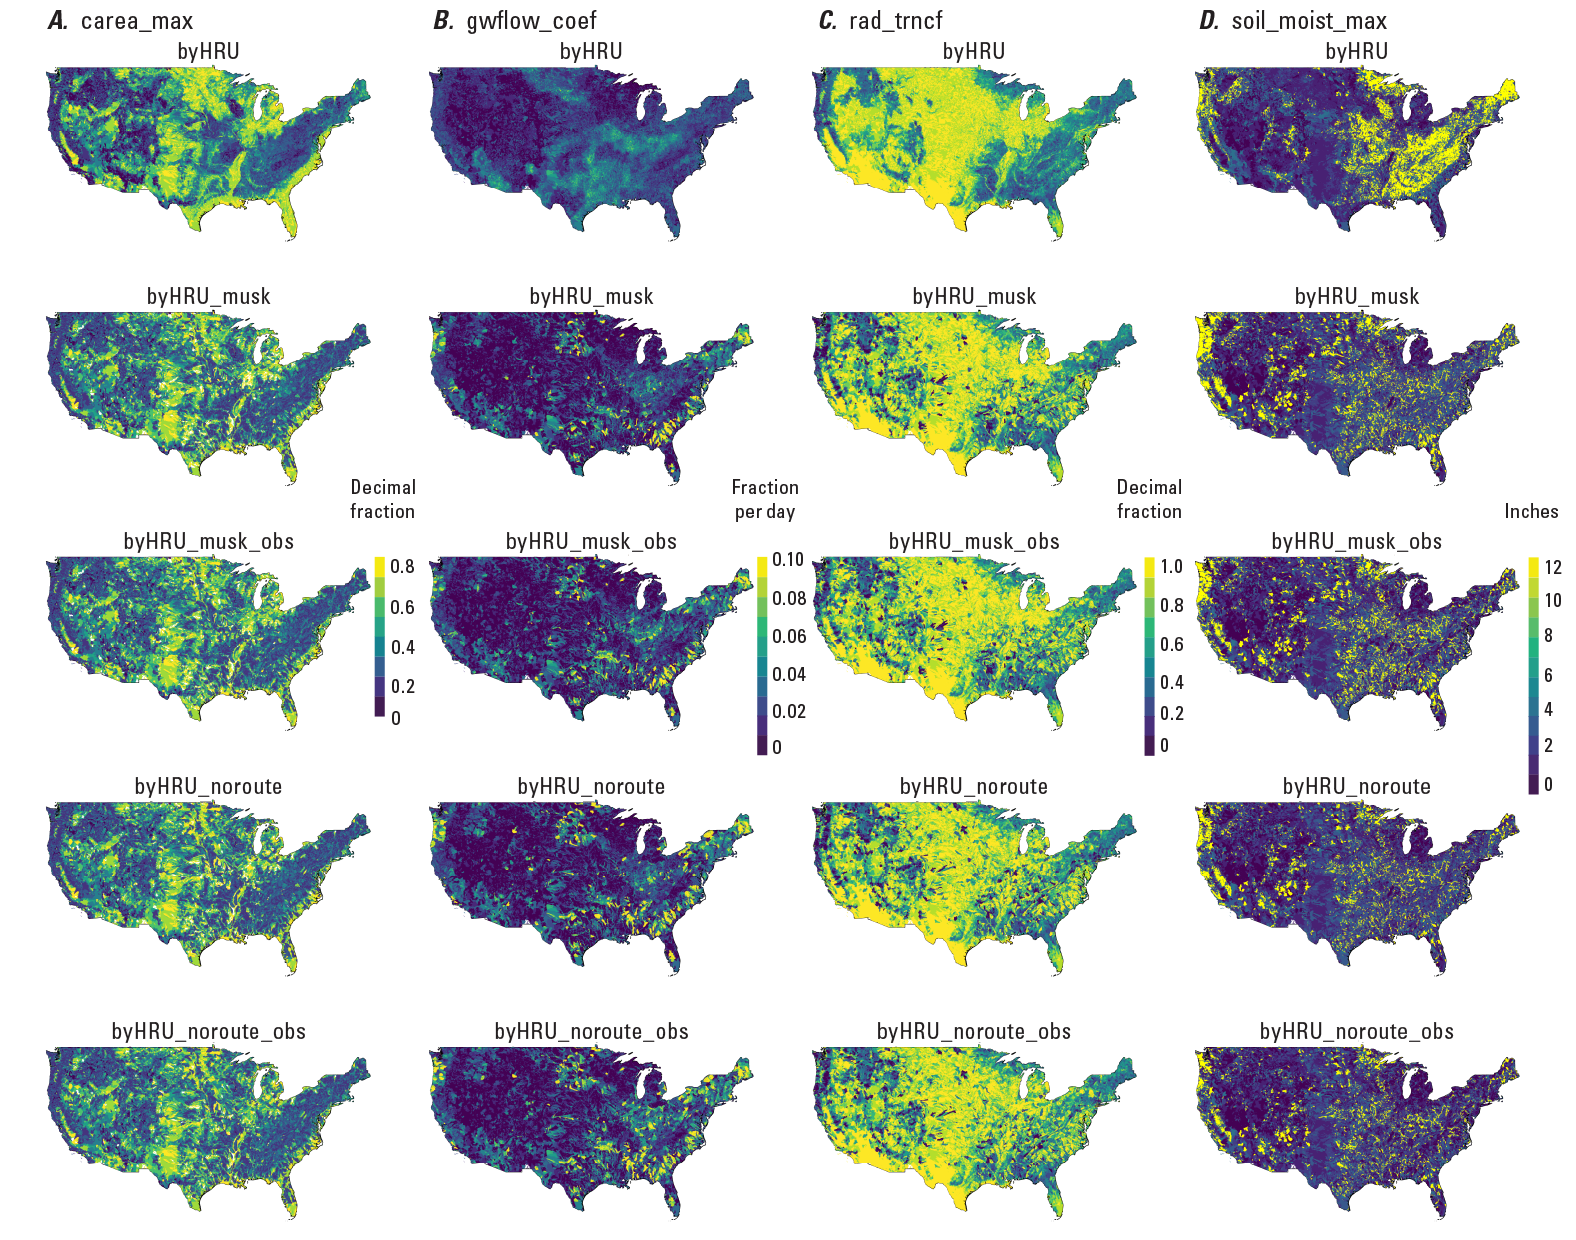 Values are depicted by a color scale on a map of the United States